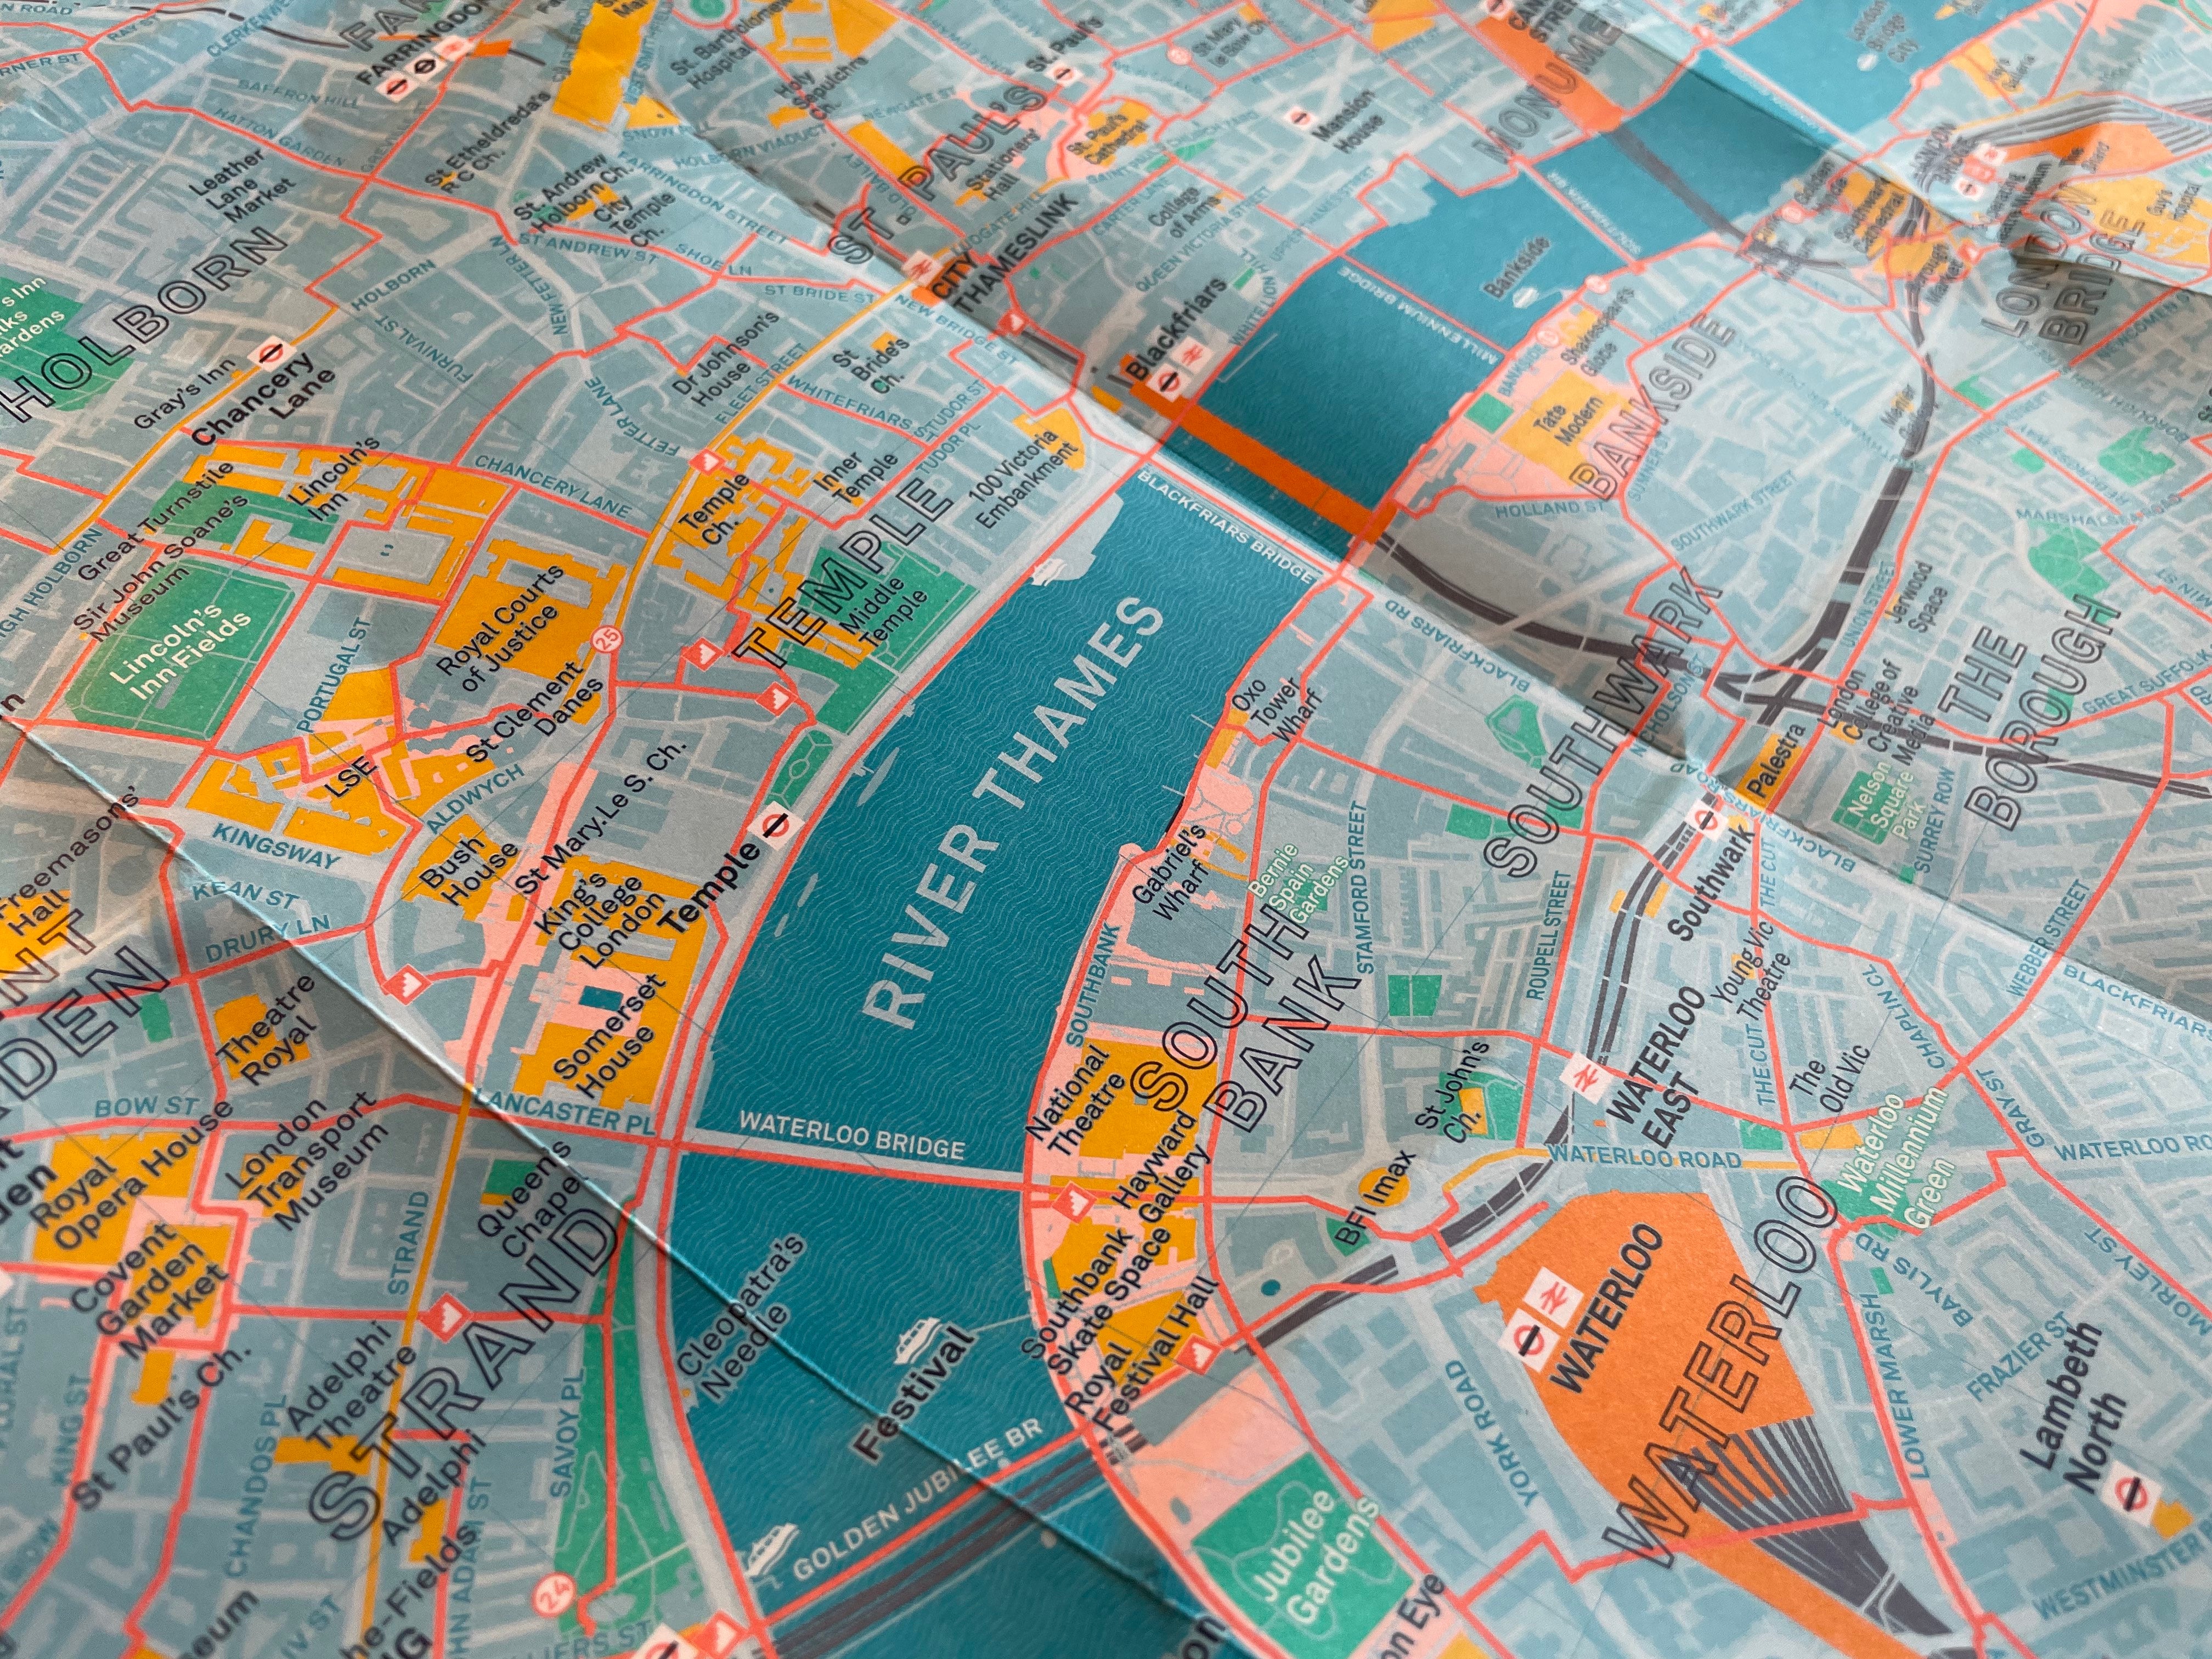 The London Footways map is being given away at mainline railway stations in the capital